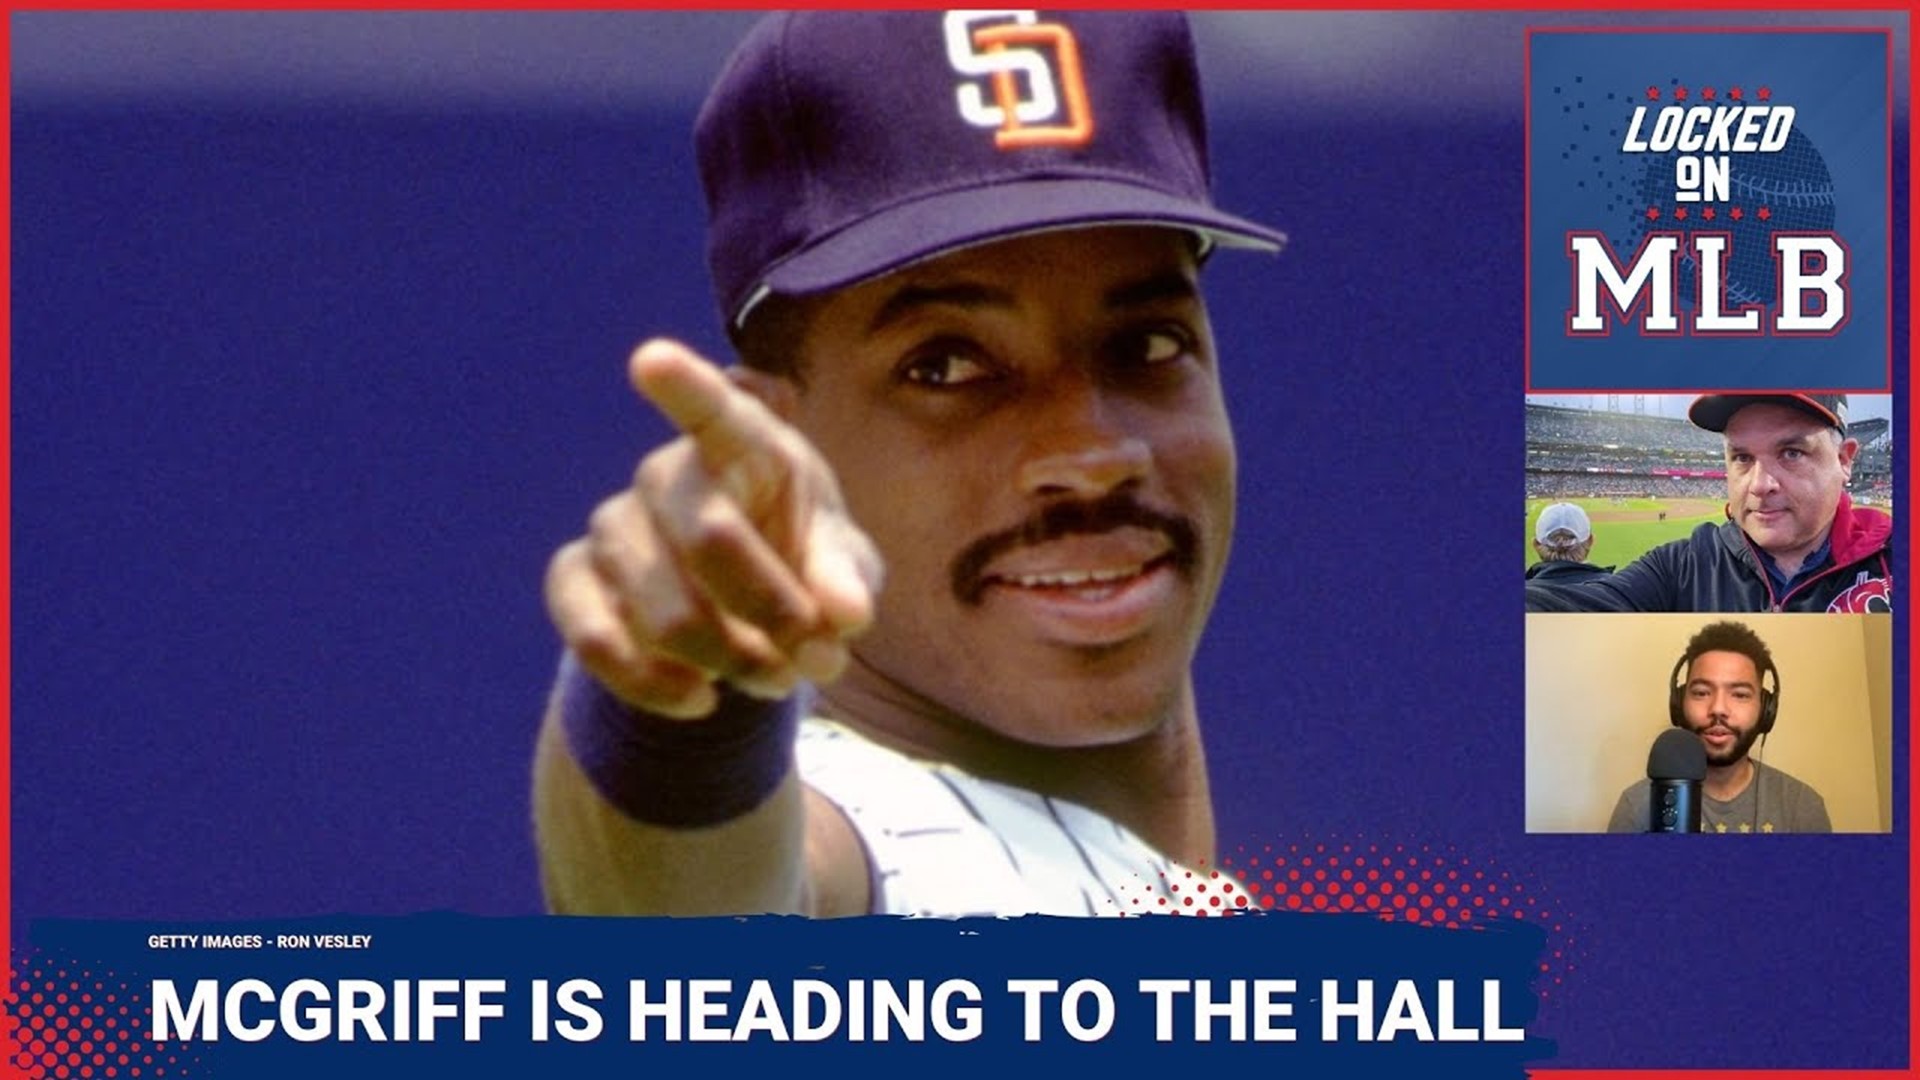 Locked on MLB - Fred McGriff is Hall of Fame Bound with Millard